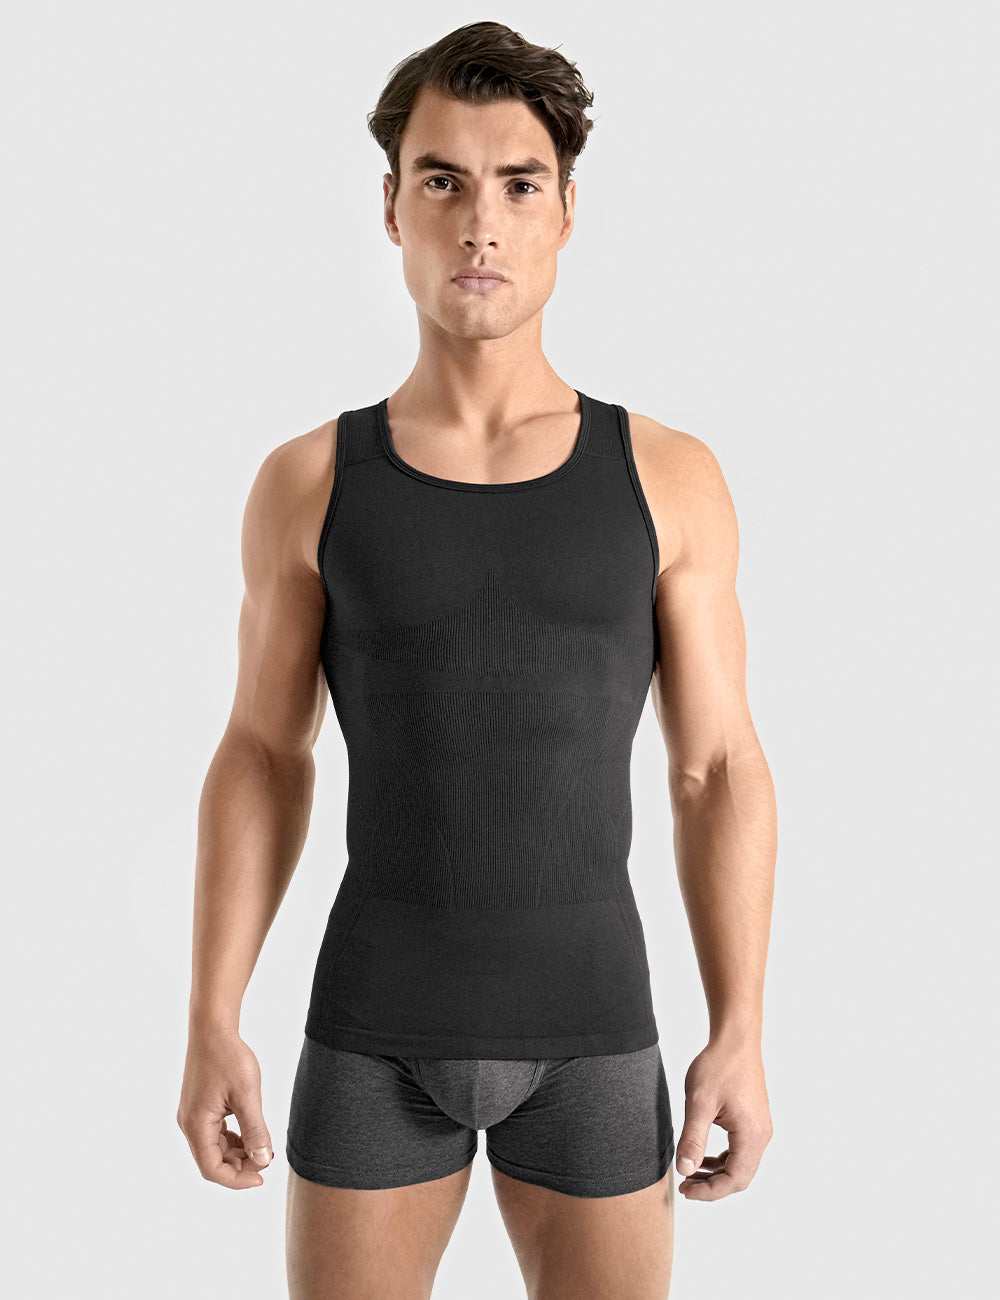 What Do Compression Tank Tops Do?